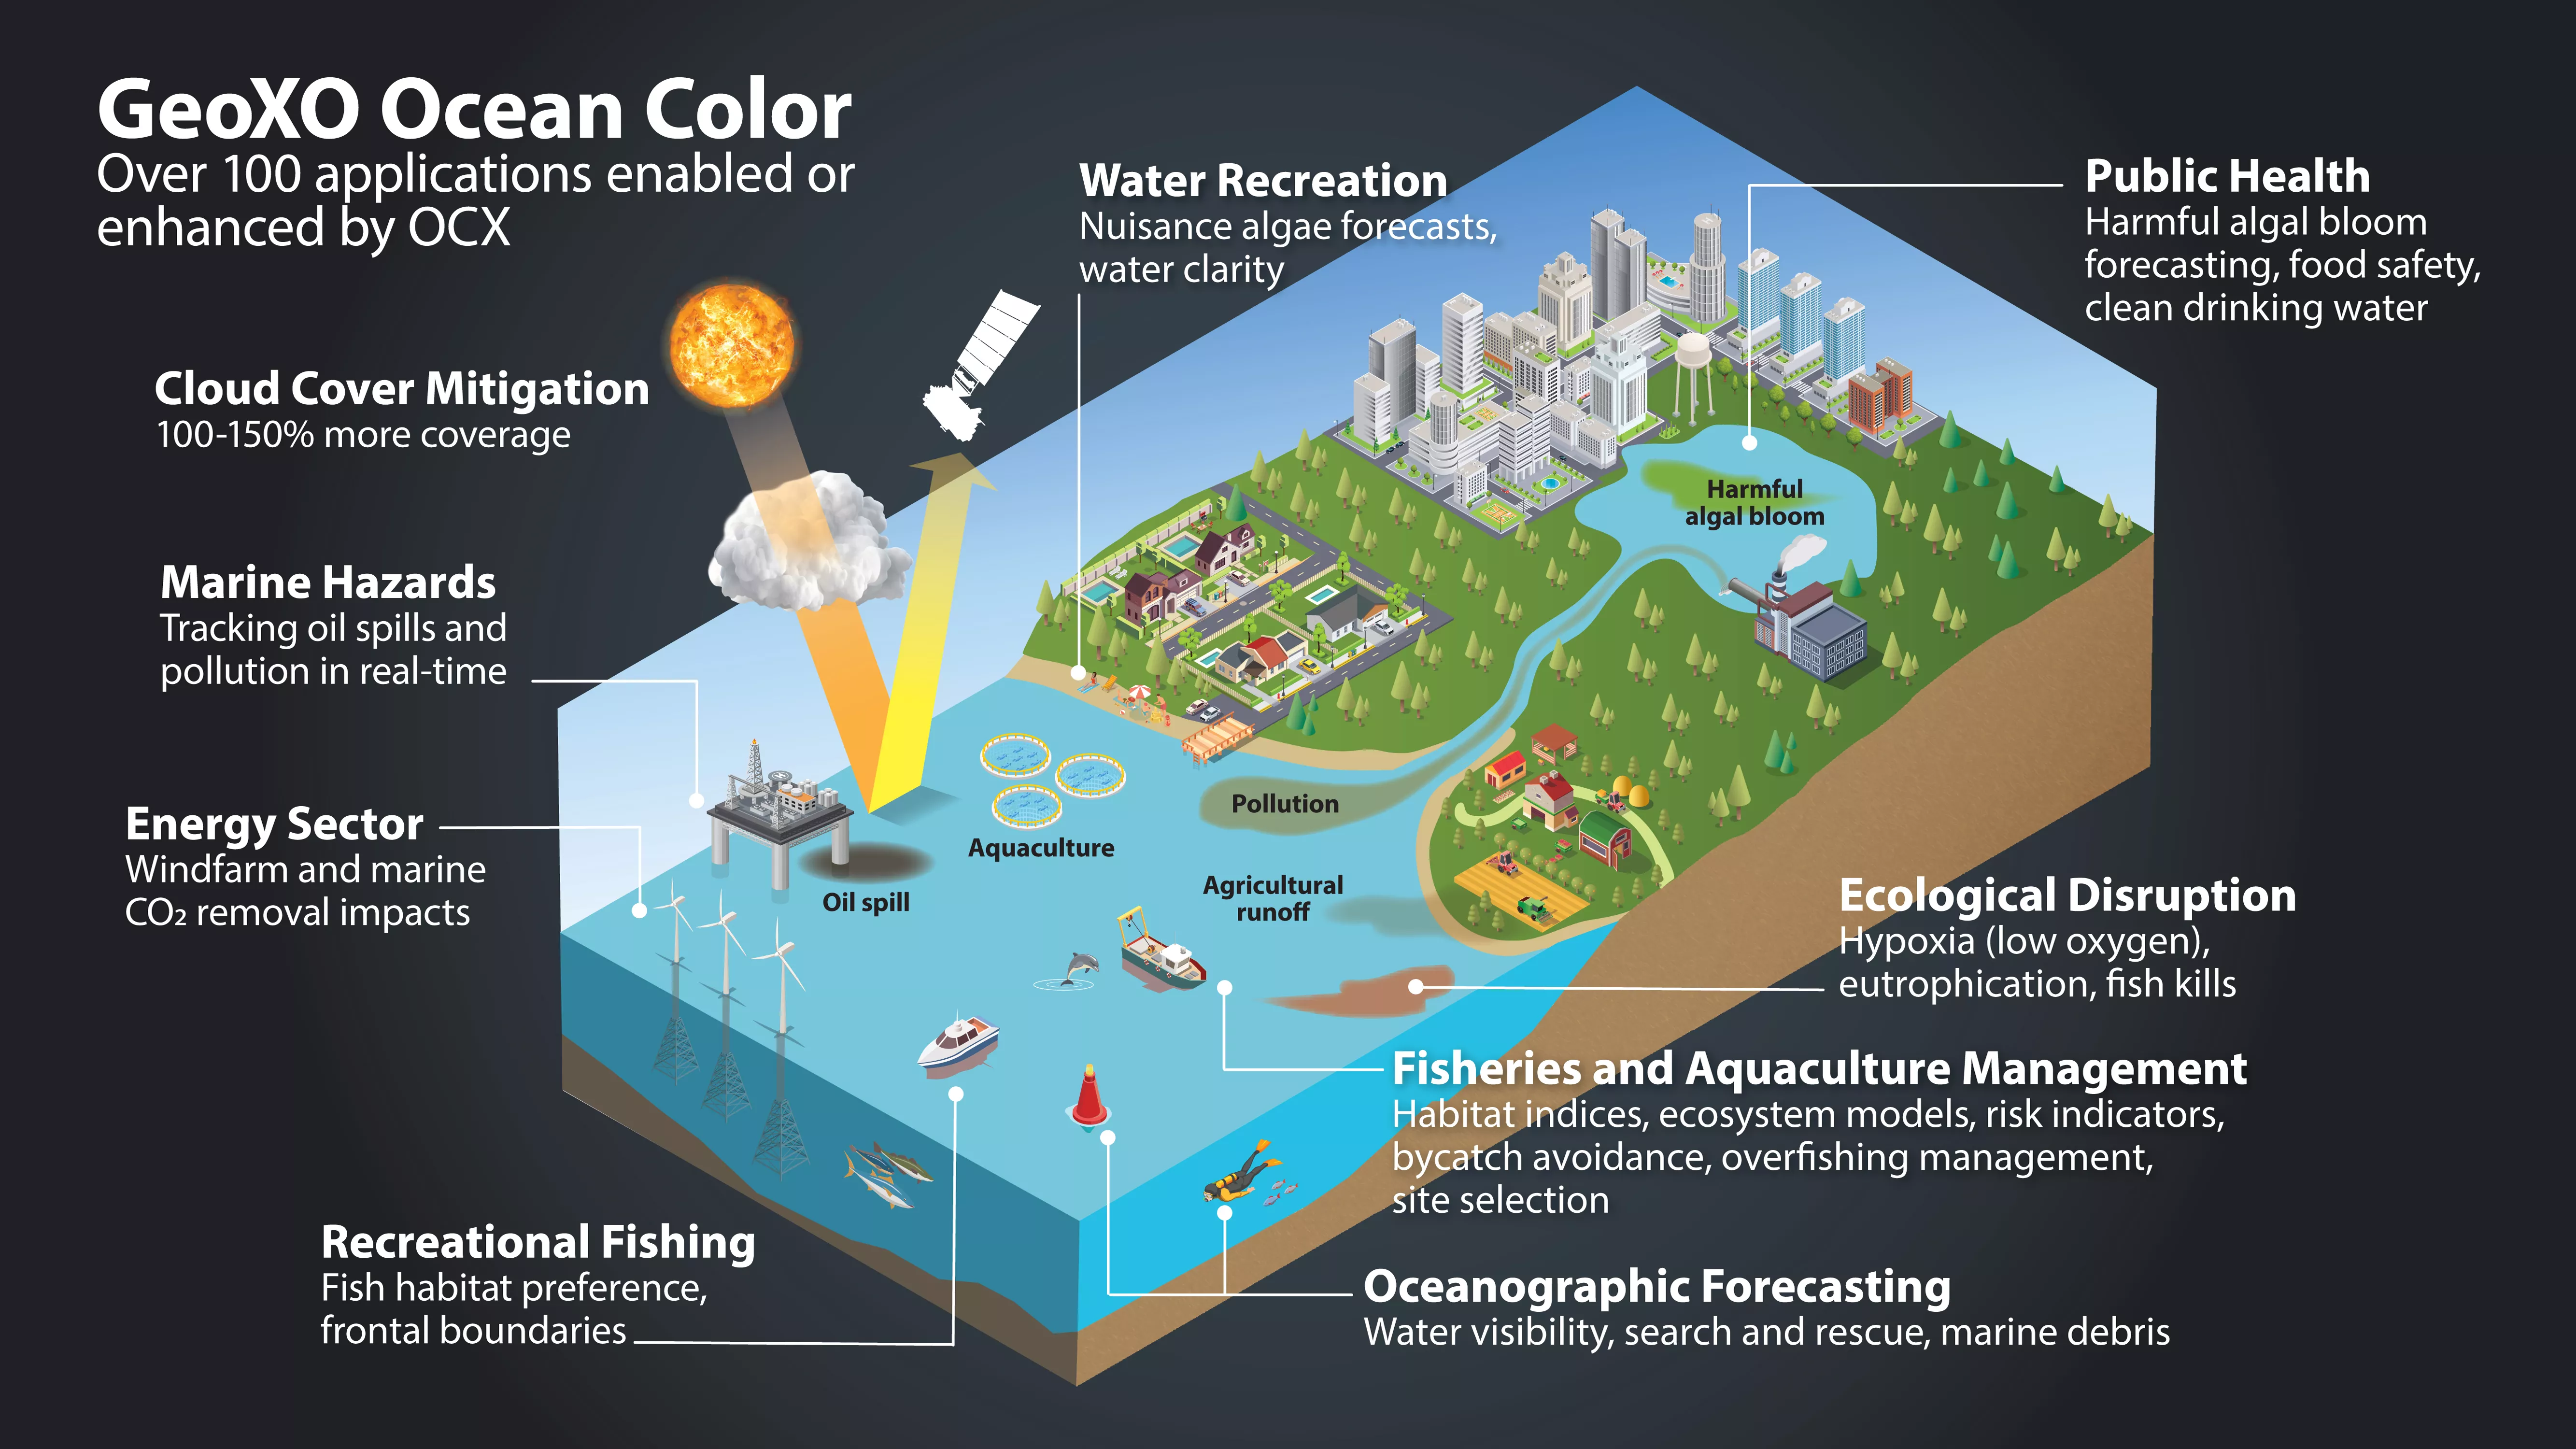 Satellite Remote Sensing Of Ocean Color Gives Critical Insights Into Ecosystem